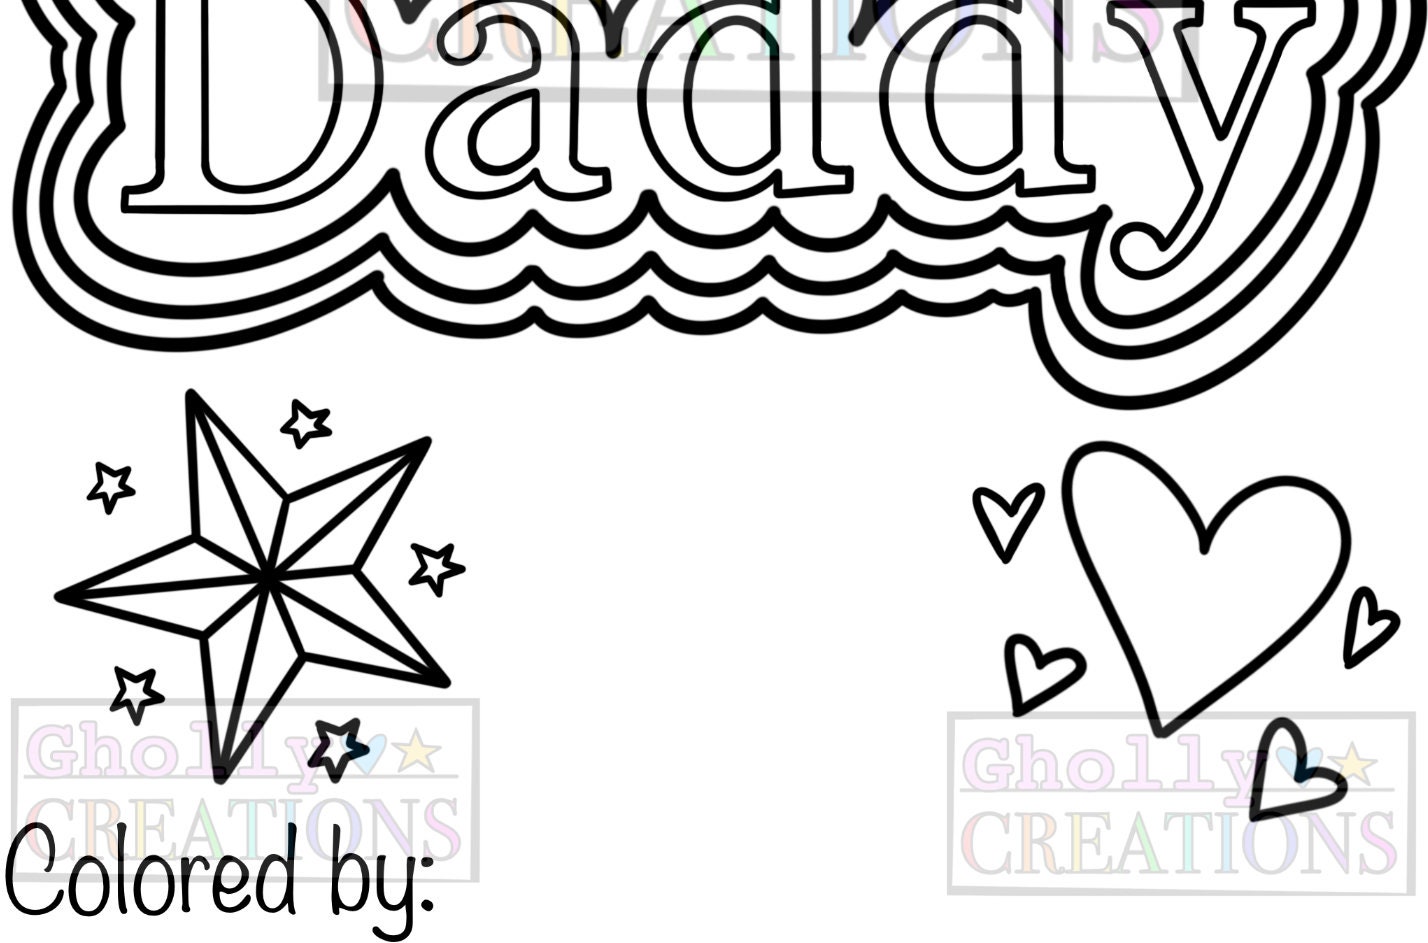 Yes daddy ddlg coloring page